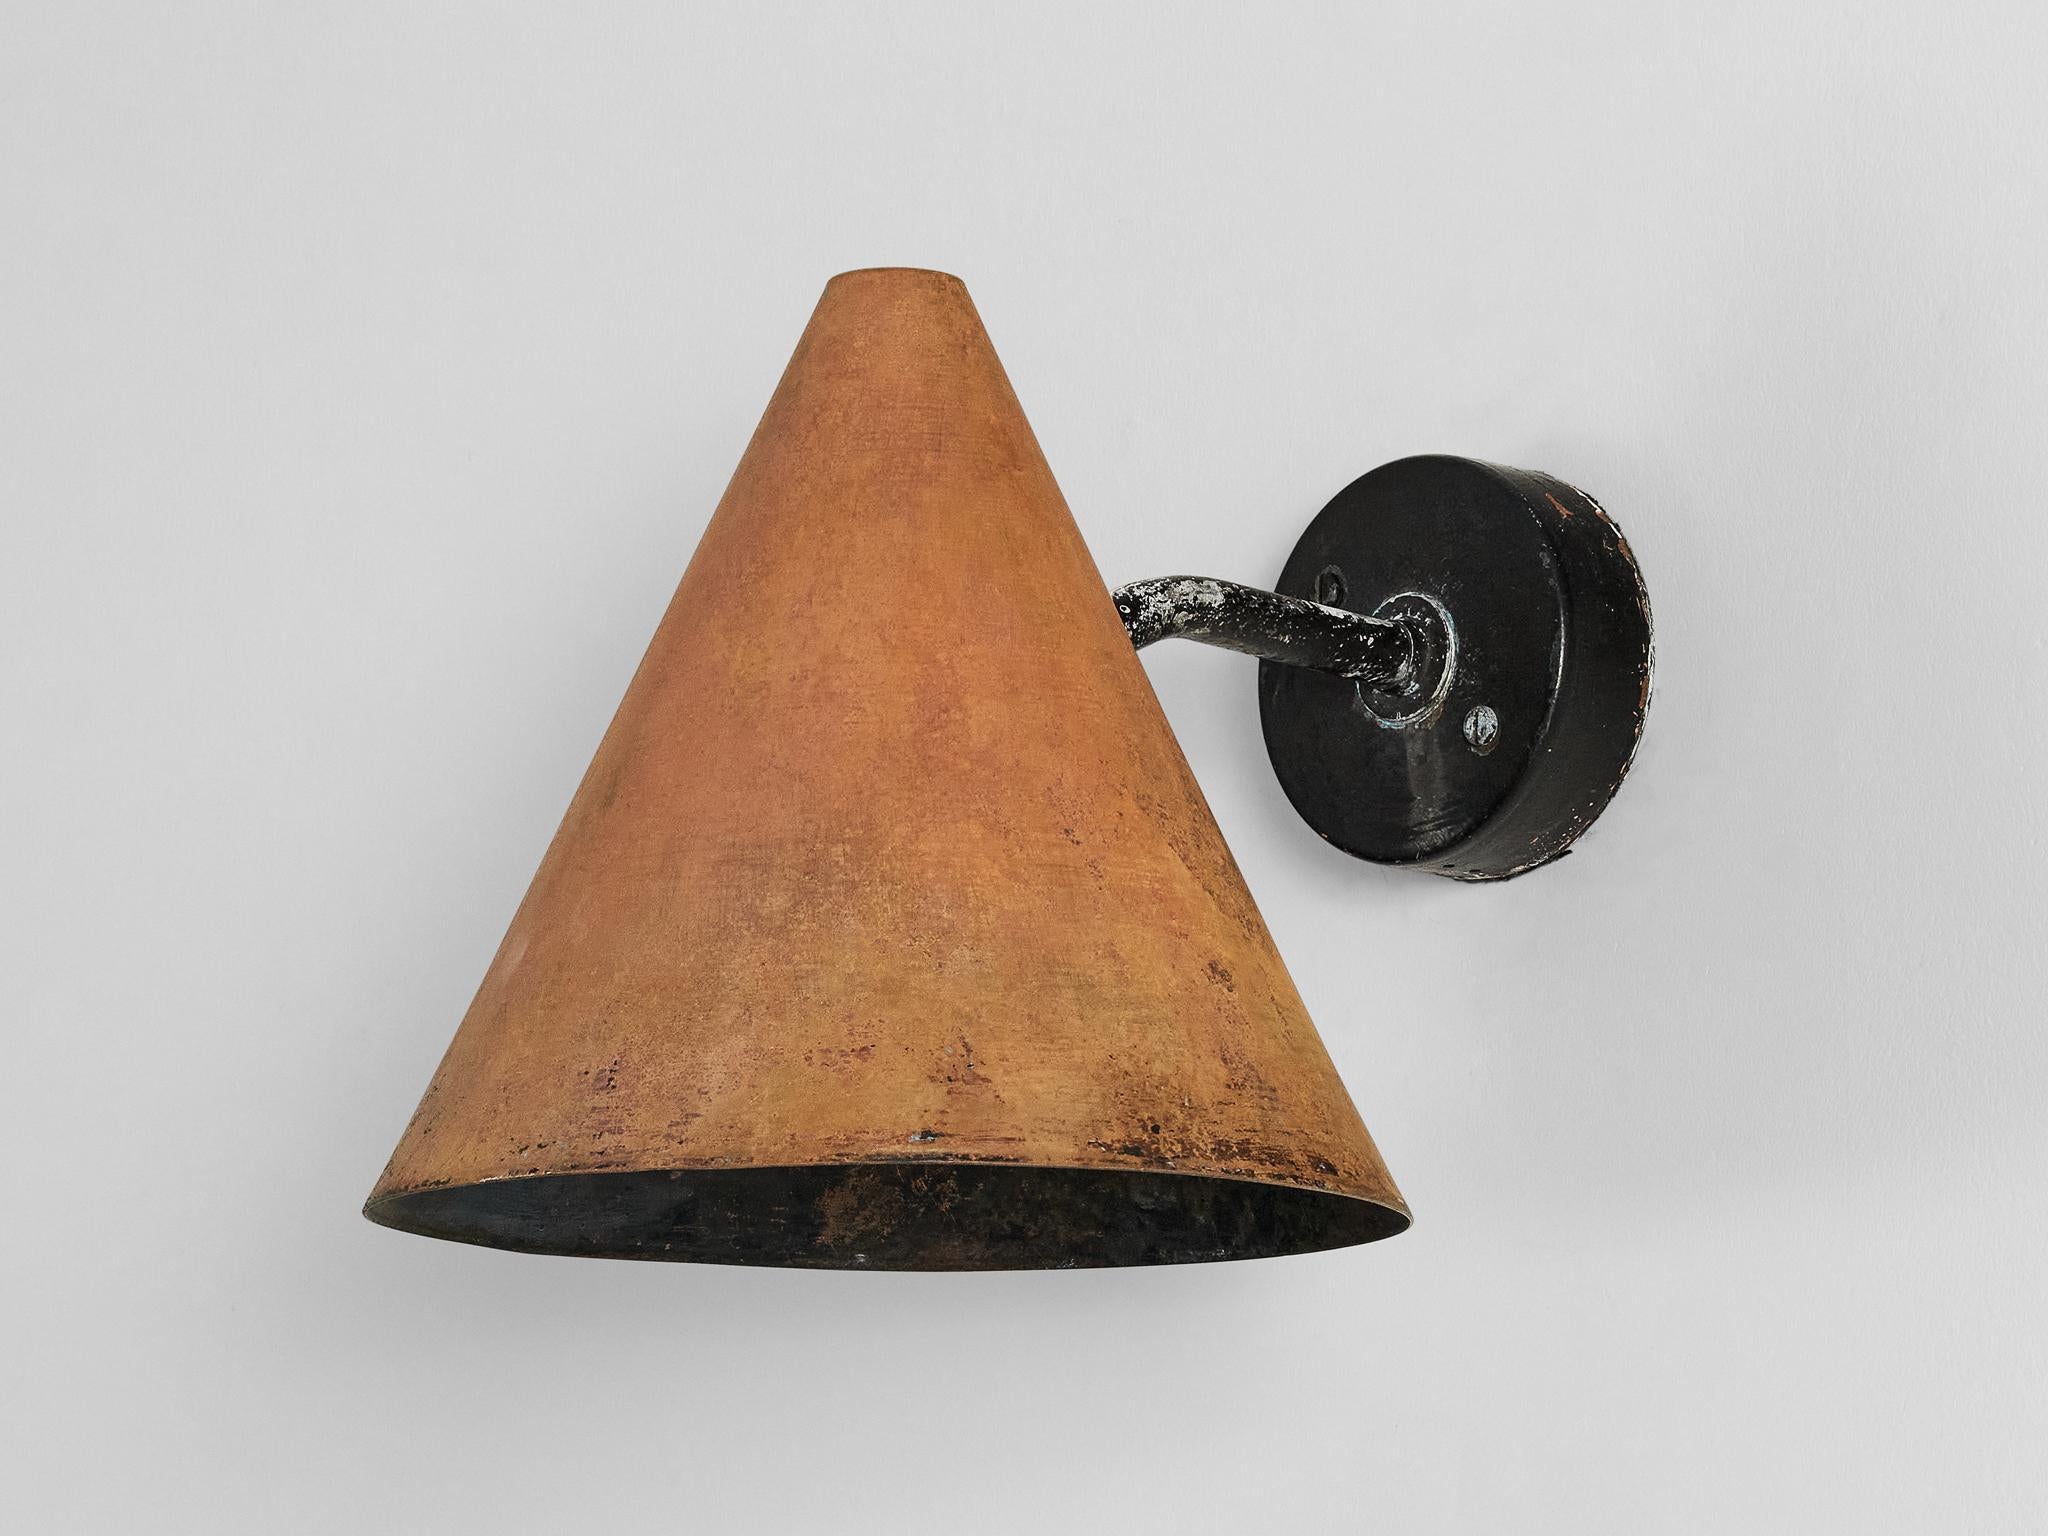 Hans-Agne Jakobsson 'Tratten' Wall Light in Patinated Copper